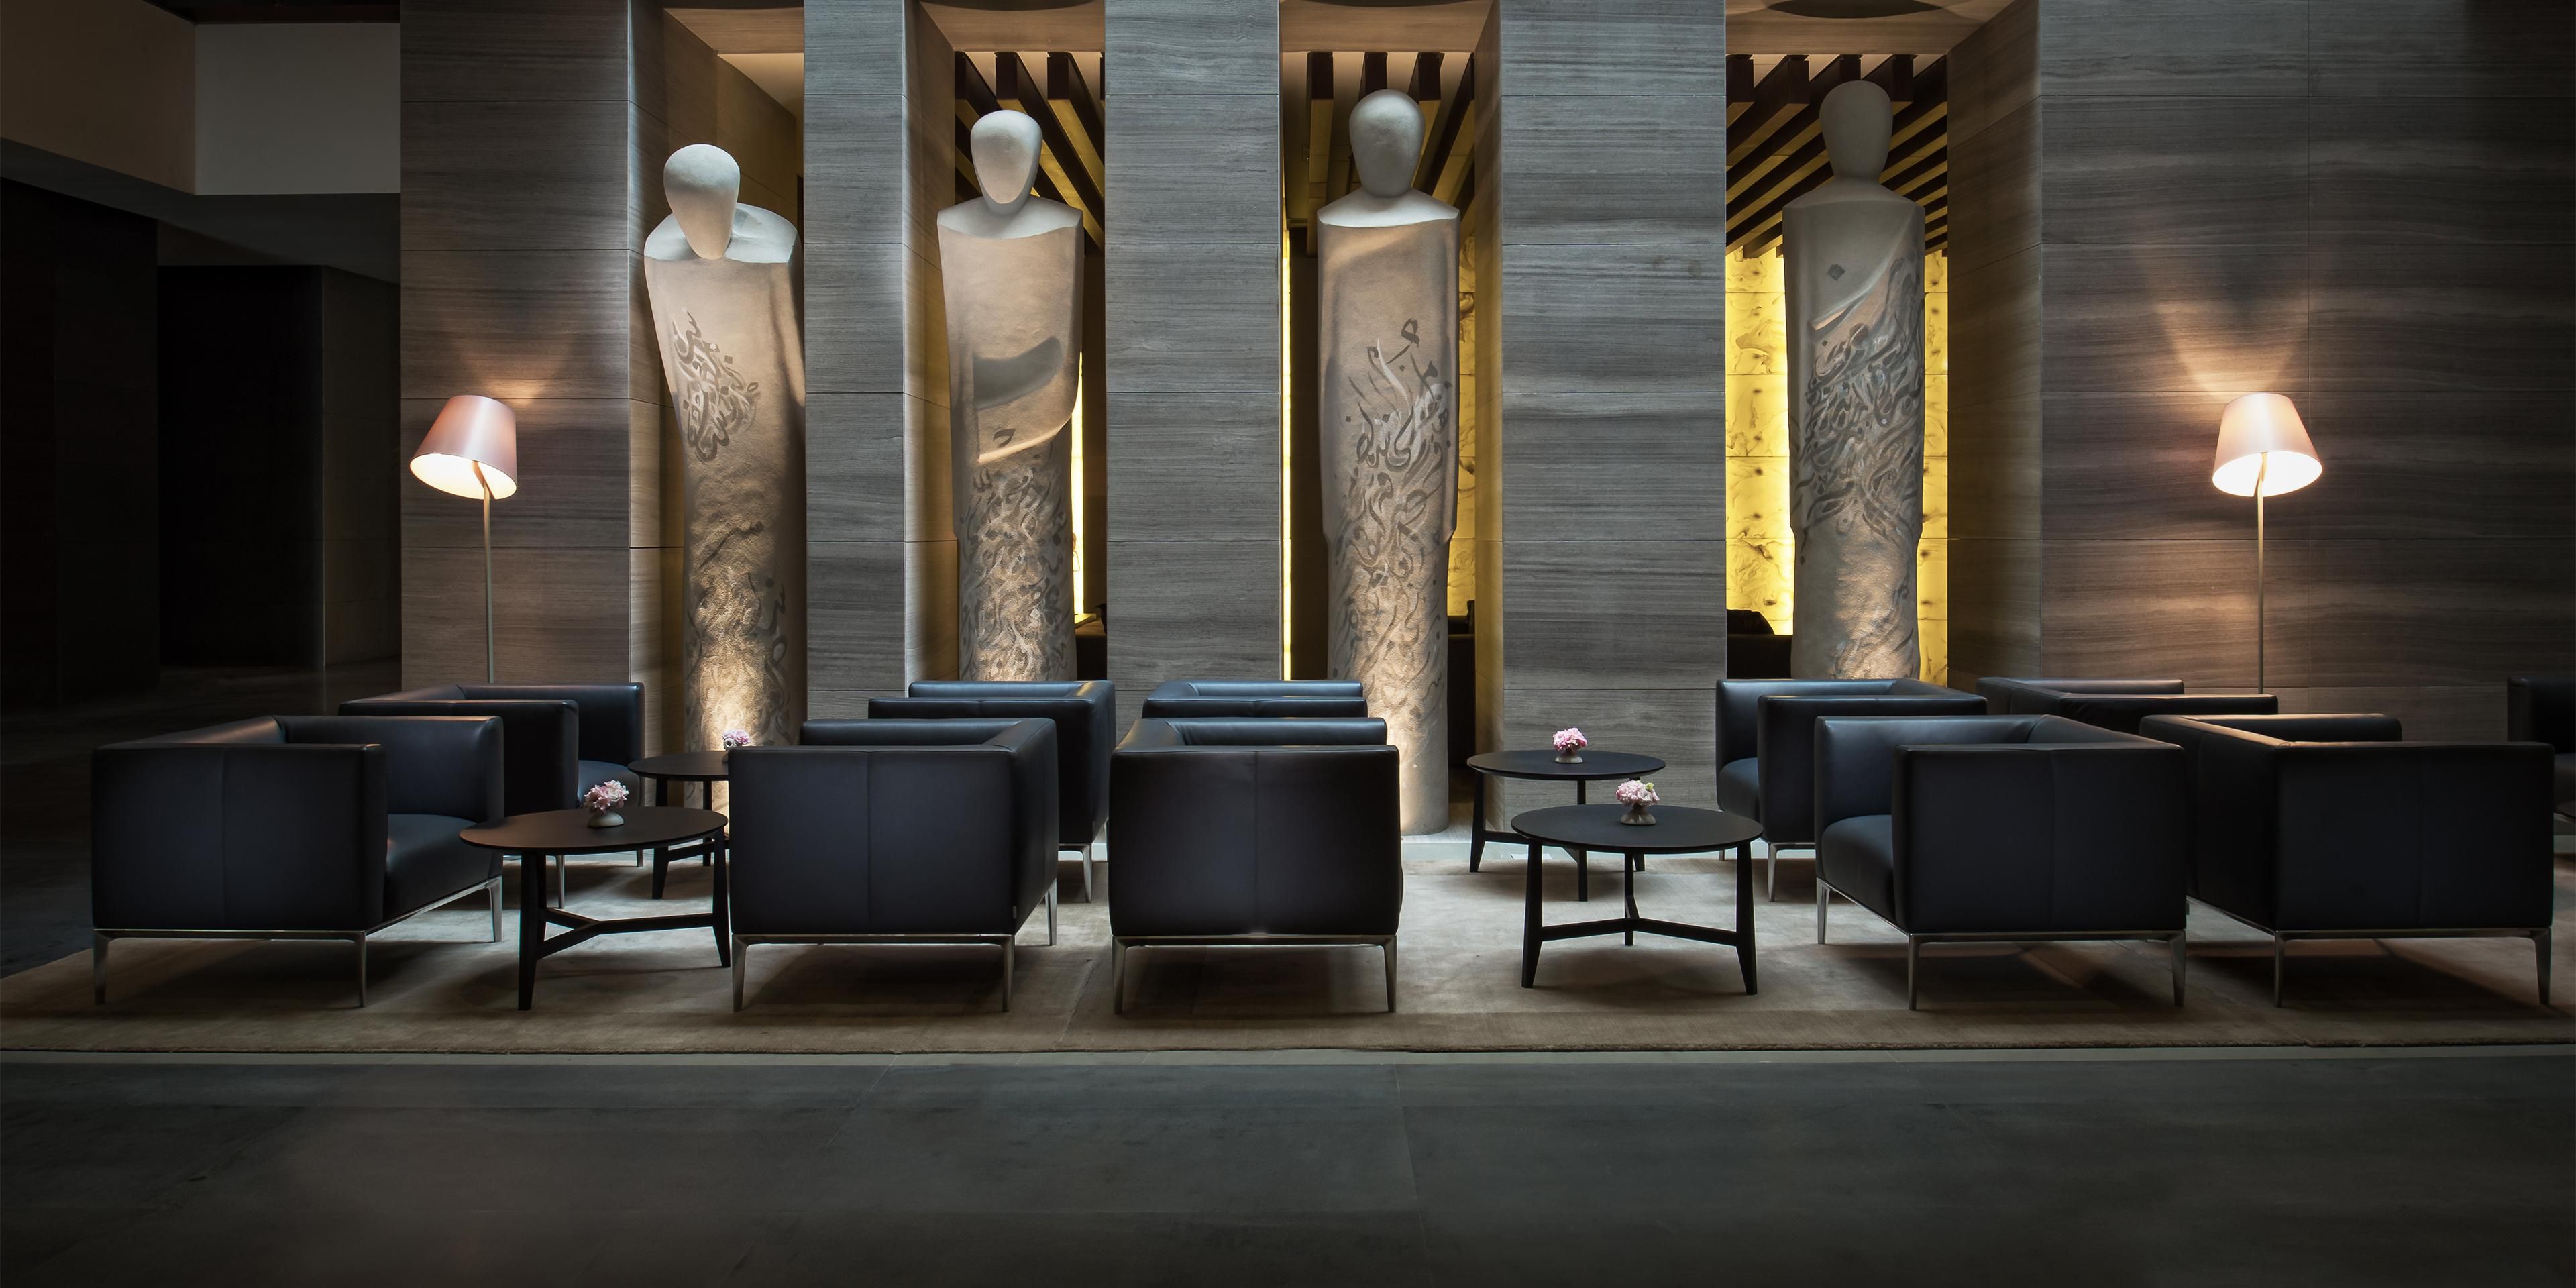 At InterContinental Dubai Marina, we have put art at the core of our design. With design furniture and bespoke art pieces placed throughout, the lobby area doubles as an open-space gallery with statement statues and figurines. Live among exceptional artwork as you experience our lobby and common areas.